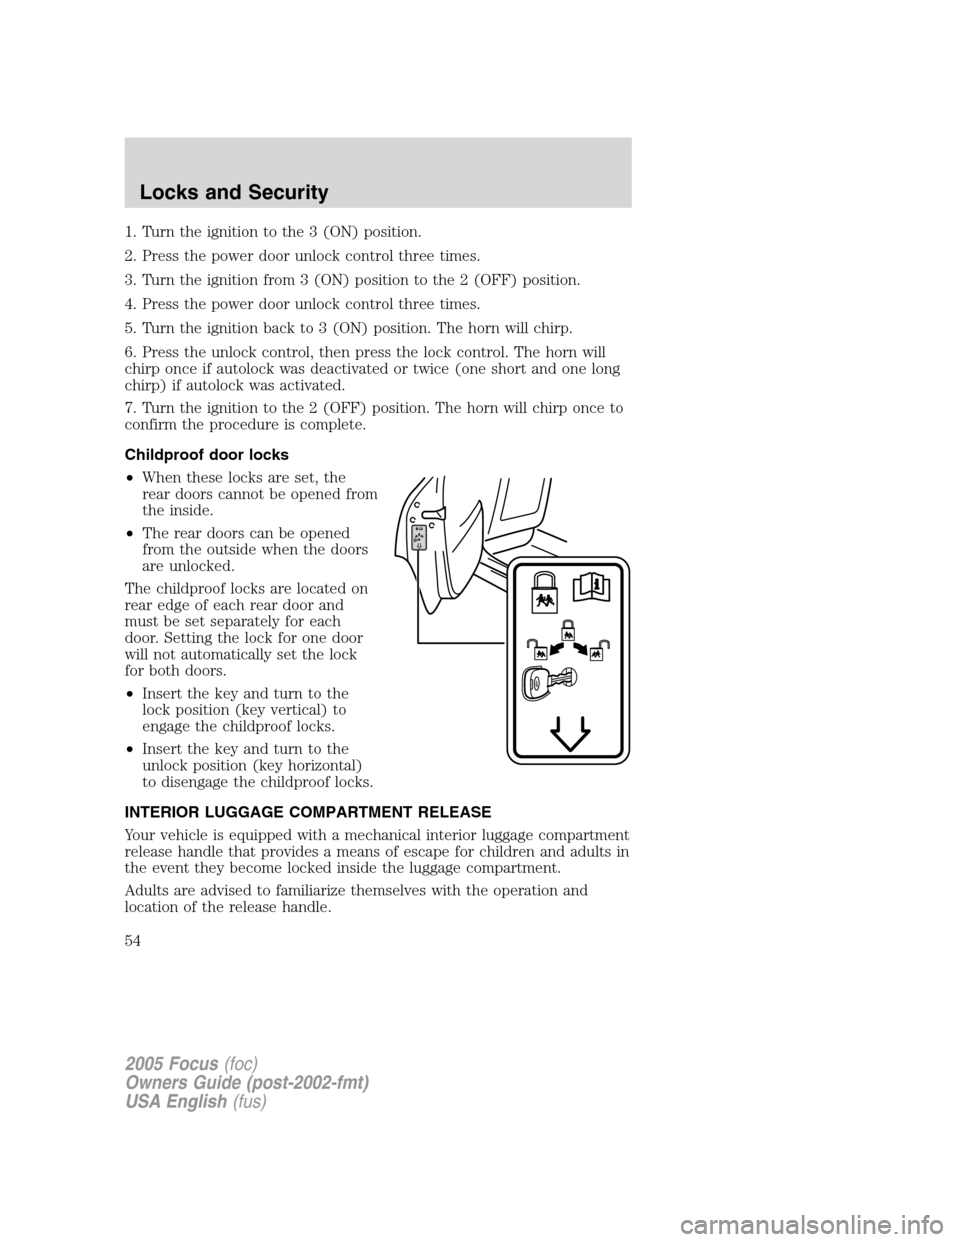 FORD FOCUS 2005 1.G Owners Manual 1. Turn the ignition to the 3 (ON) position.
2. Press the power door unlock control three times.
3. Turn the ignition from 3 (ON) position to the 2 (OFF) position.
4. Press the power door unlock contr